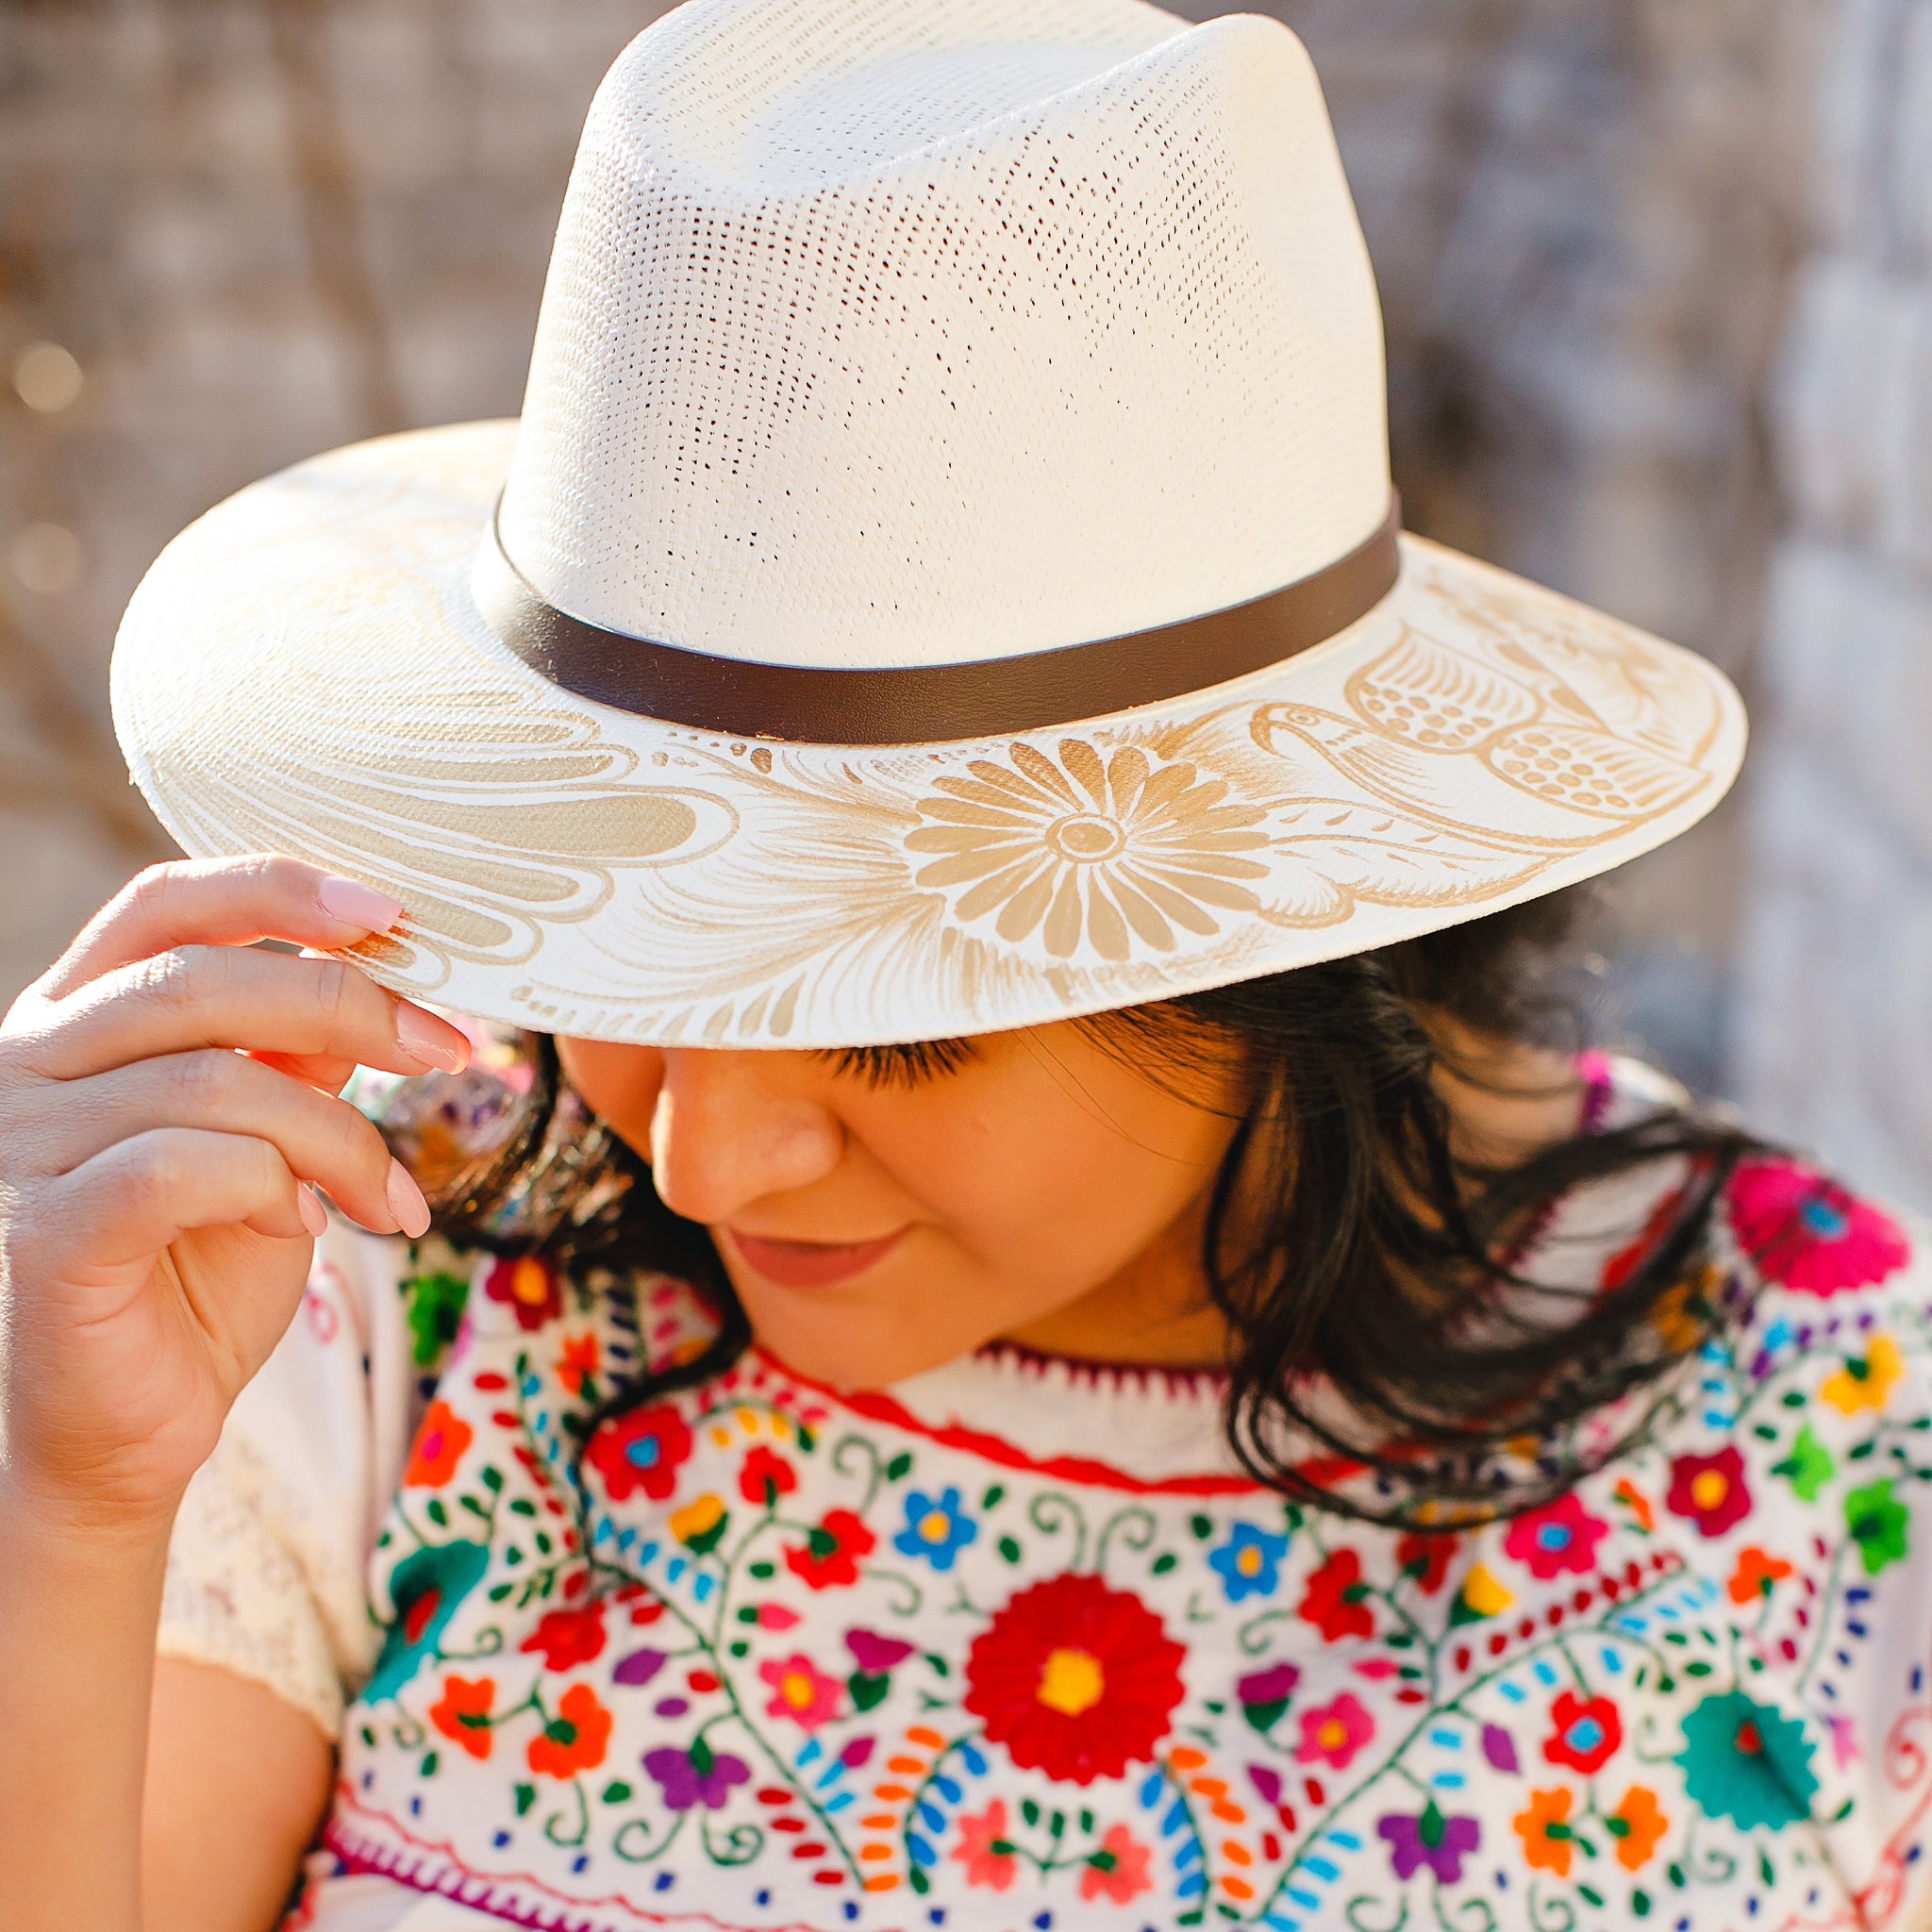 Andrea Artisanal Hat - Hand Painted in Mexico